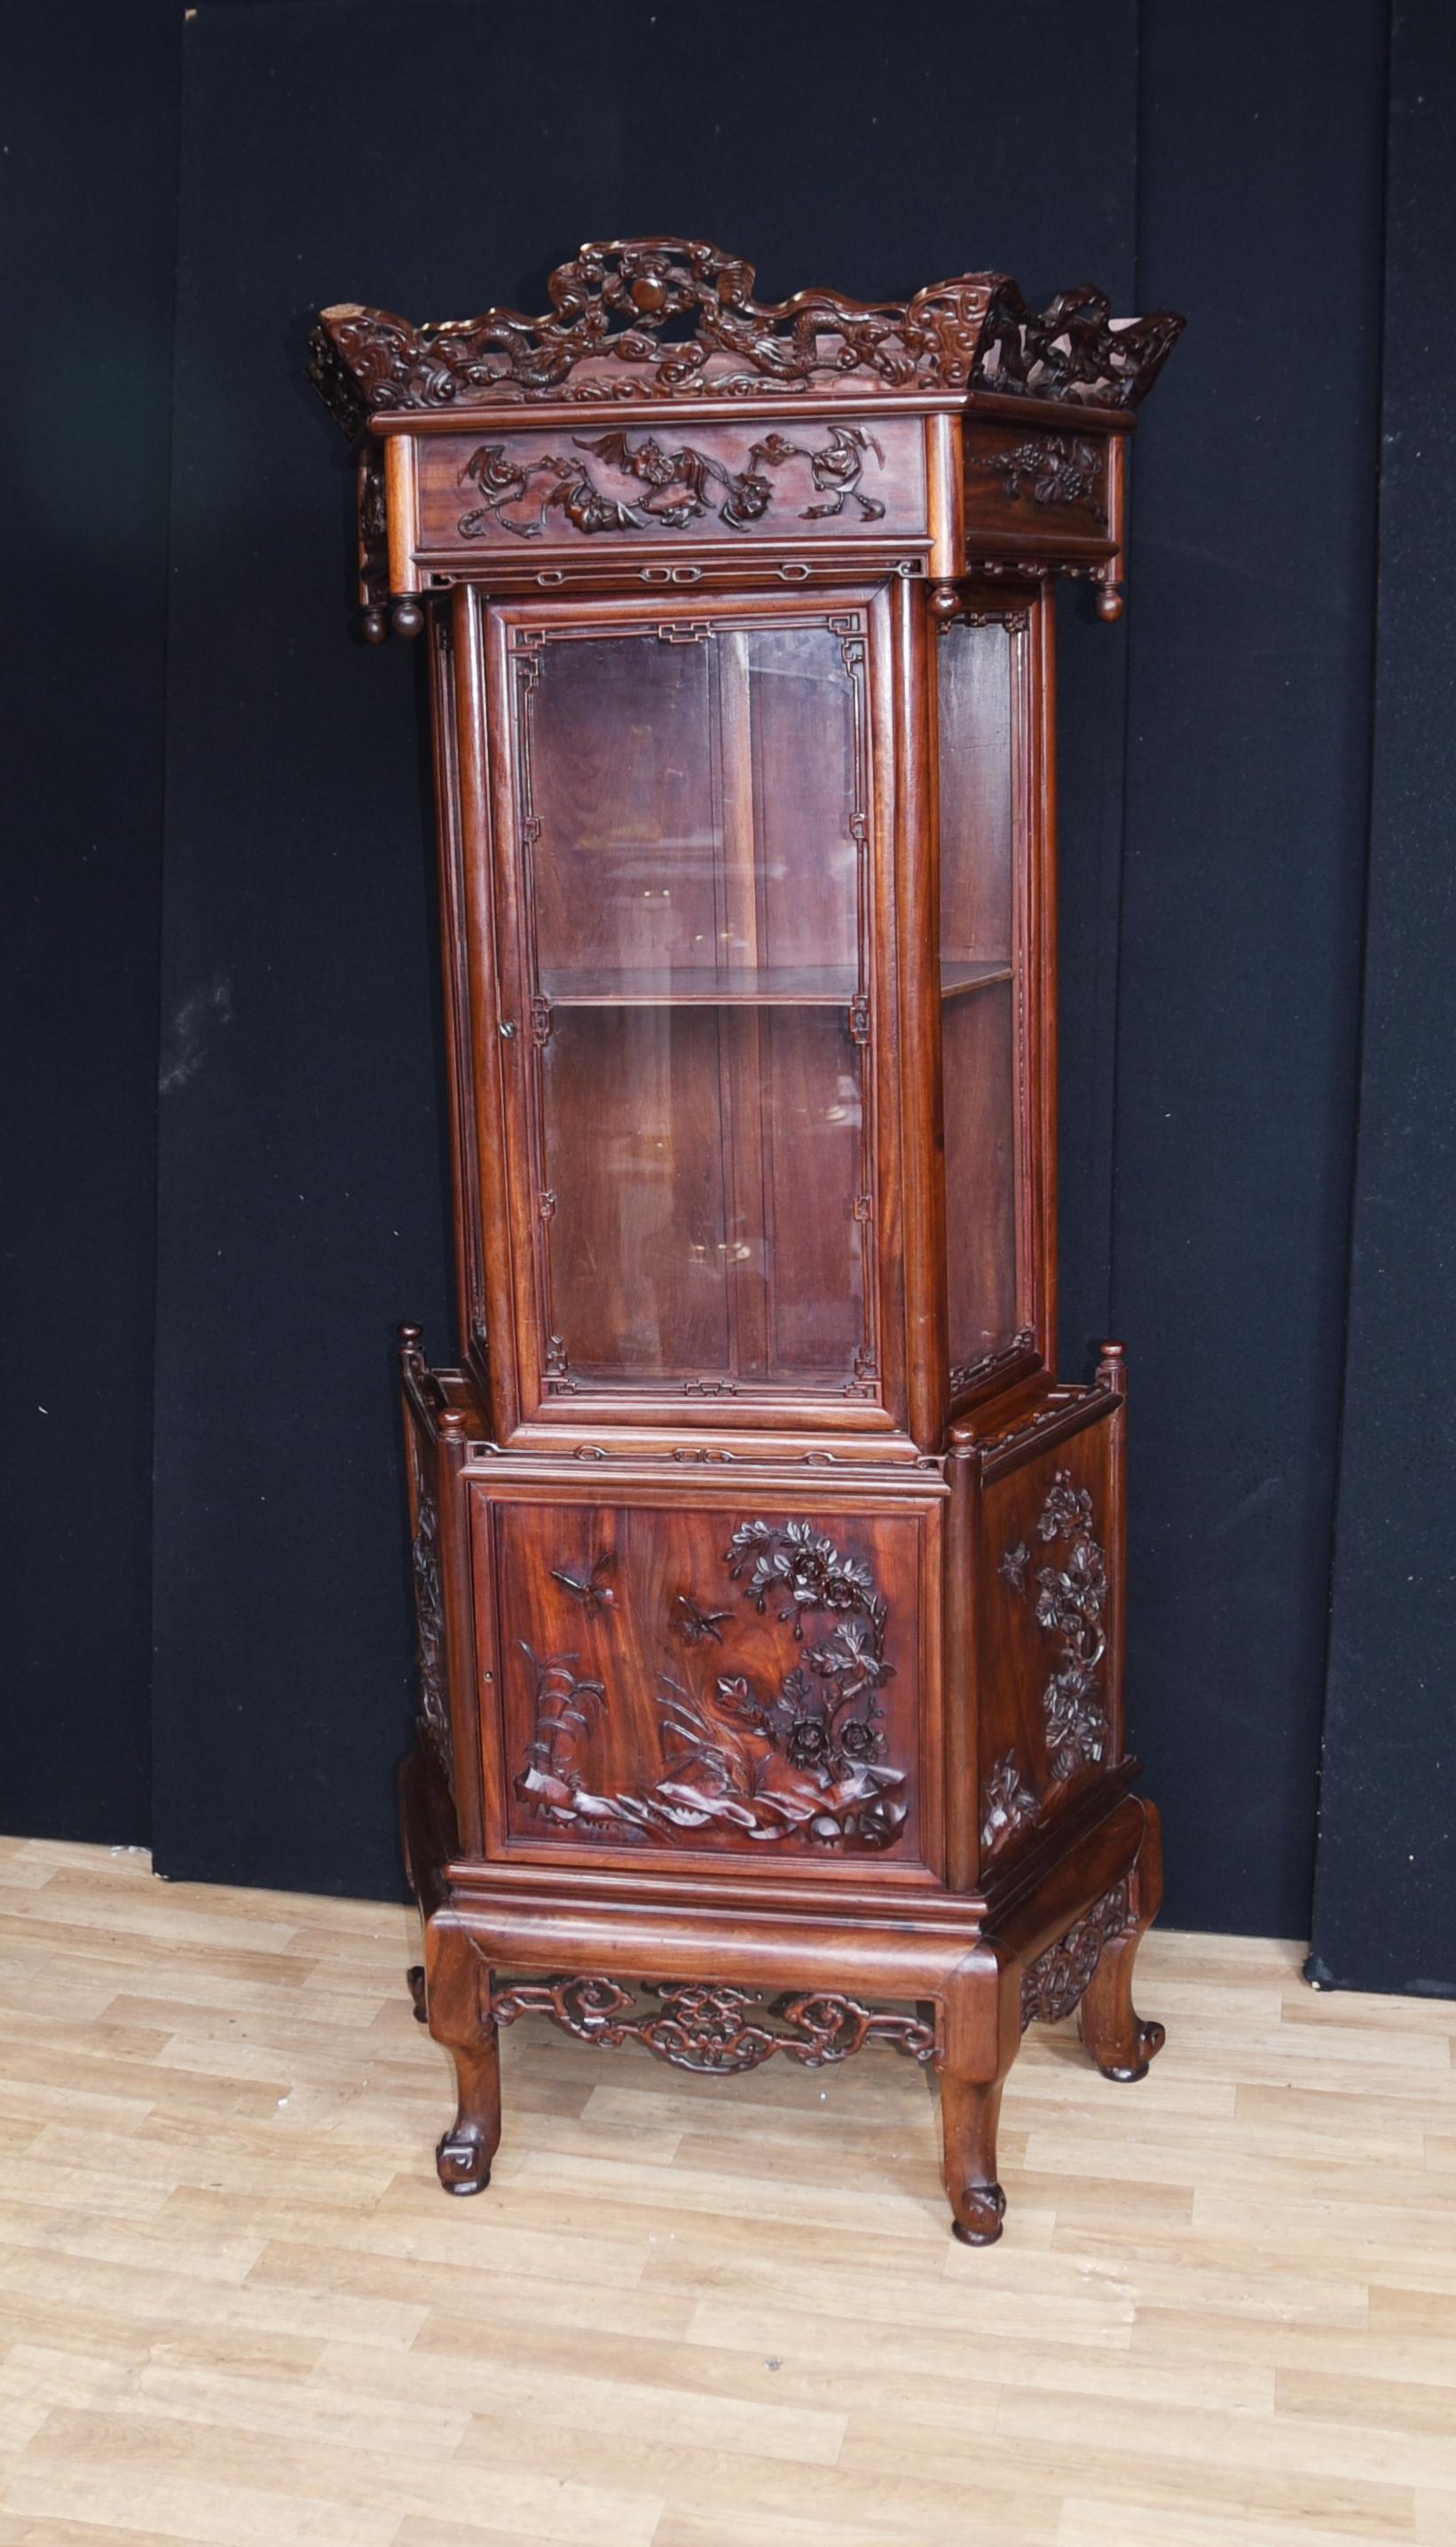 Padouk Antique Chinese Padauk Hand Carved Display Cabinet Relief Carving Bookcase 1890